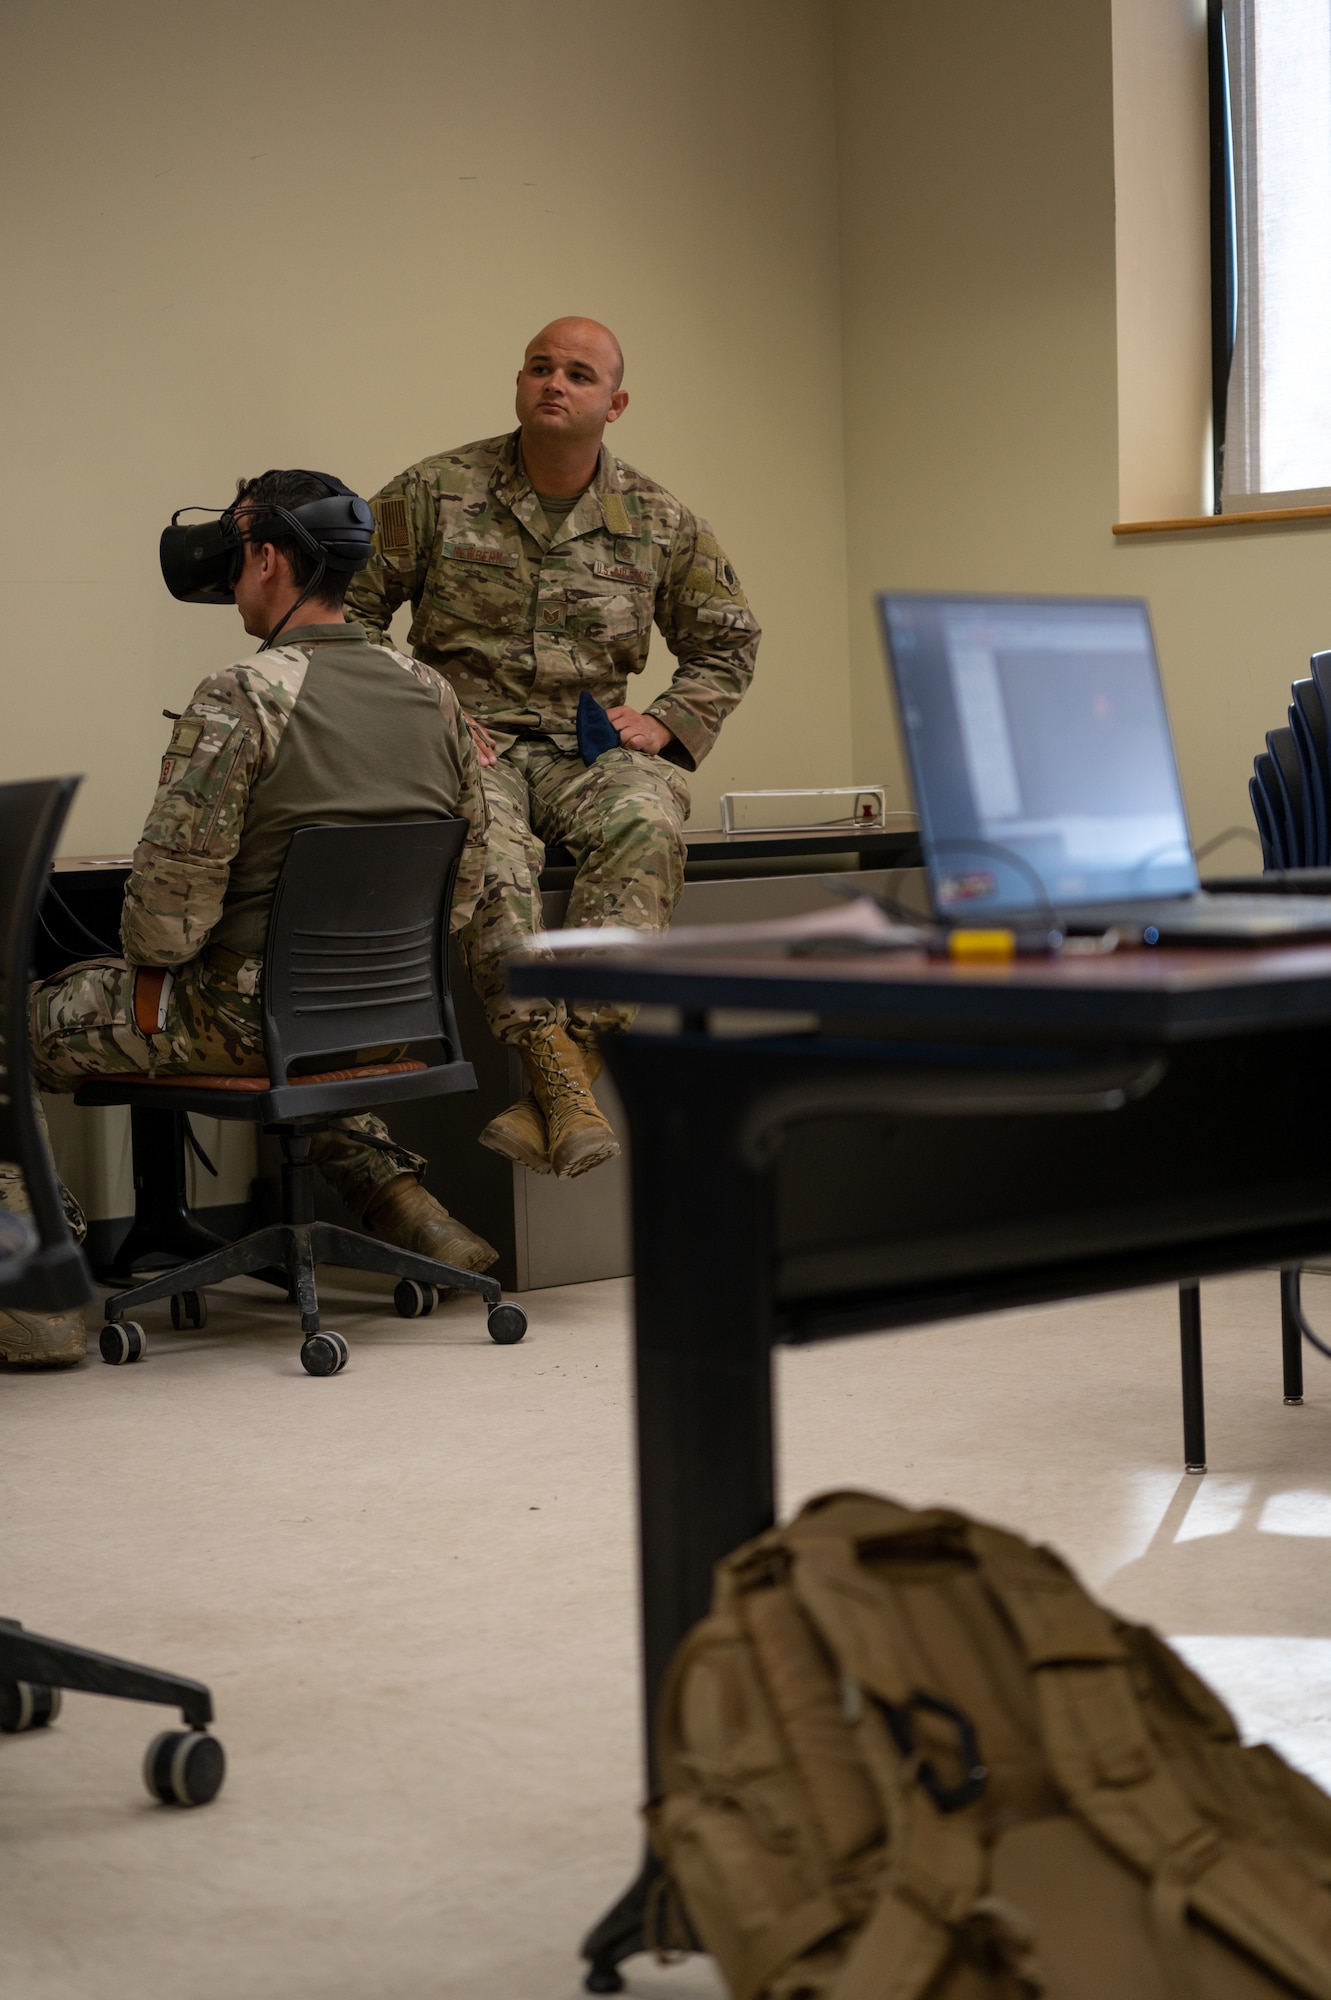 U.S. Air Force Technical Sgt. Edward Newberrn, 23rd Special Tactics Squadron combat controller, evaluates joint terminal attack controllers from Spain on a virtual reality simulation during Bold Quest 21.2 at Muscatatuck Urban Training Center Nov. 6, 2021. Newbernn walked through training scenarios and how to work with AC-130J Ghostrider aircraft. (U.S. Air Force photo by Staff Sgt. Rito Smith)